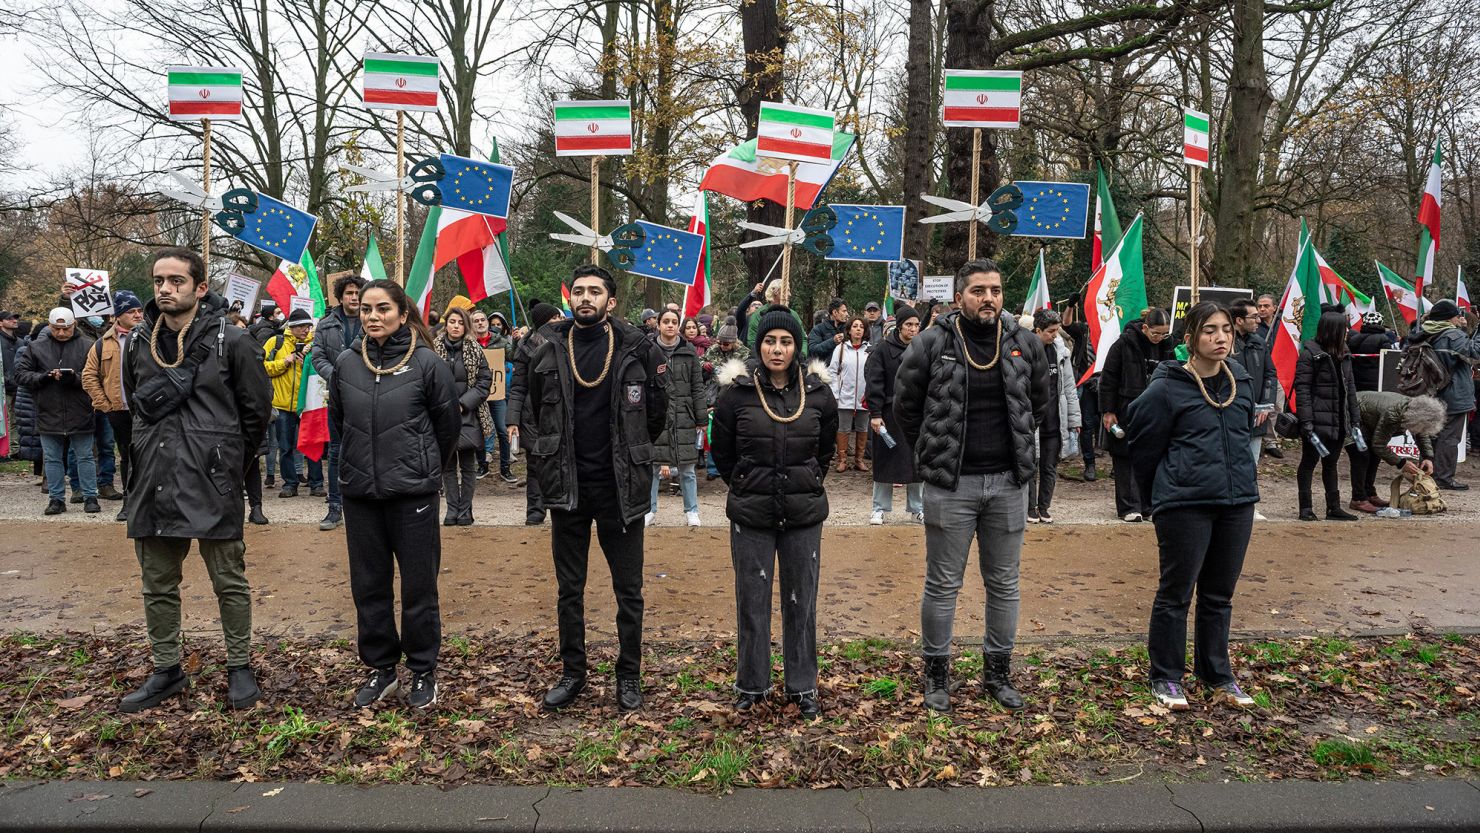 Protesters with a noose around their necks during a demonstration in The Hague on December 21. The protest called on the Dutch House of Representatives to close the Iranian embassy and to expel its diplomats.  